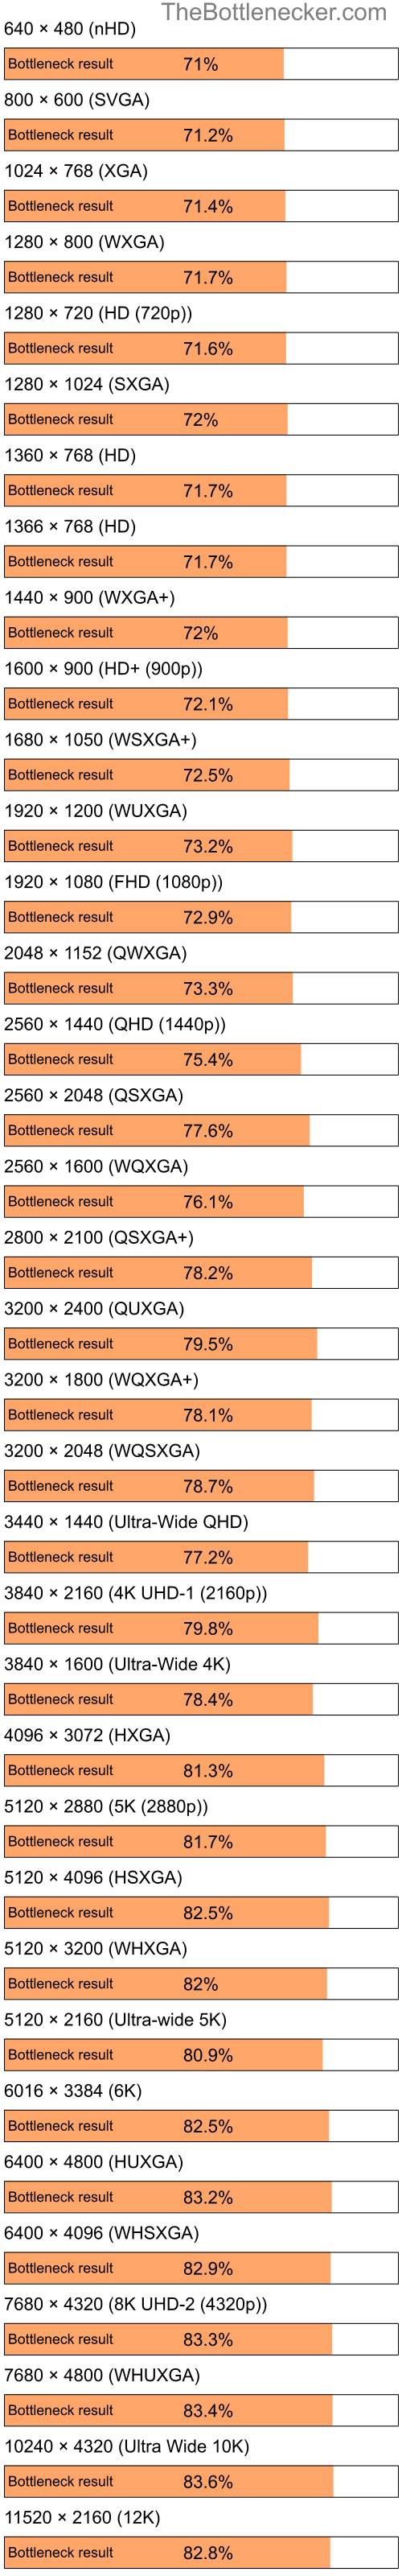 Bottleneck results by resolution for Intel Pentium 4 and AMD Radeon 9500 PRO in General Tasks